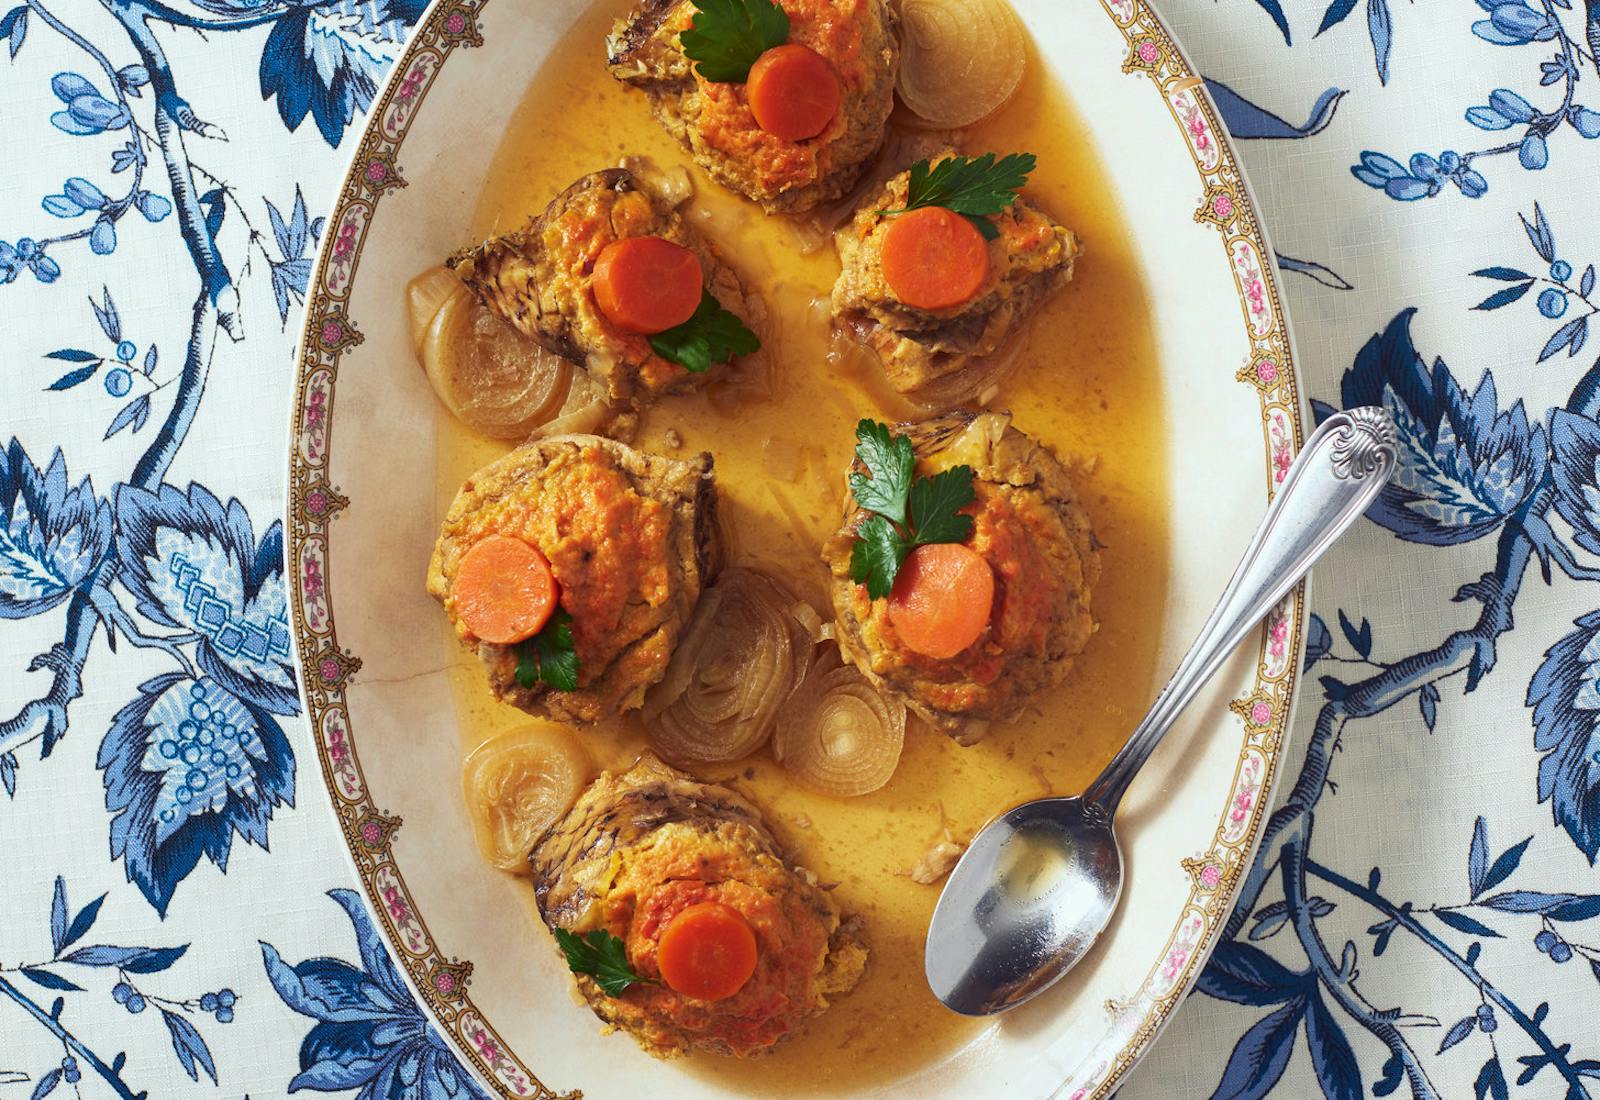 Gefilte fish in sauce with parsley, carrots and onions on oblong serving dish atop blue floral tablecloth.